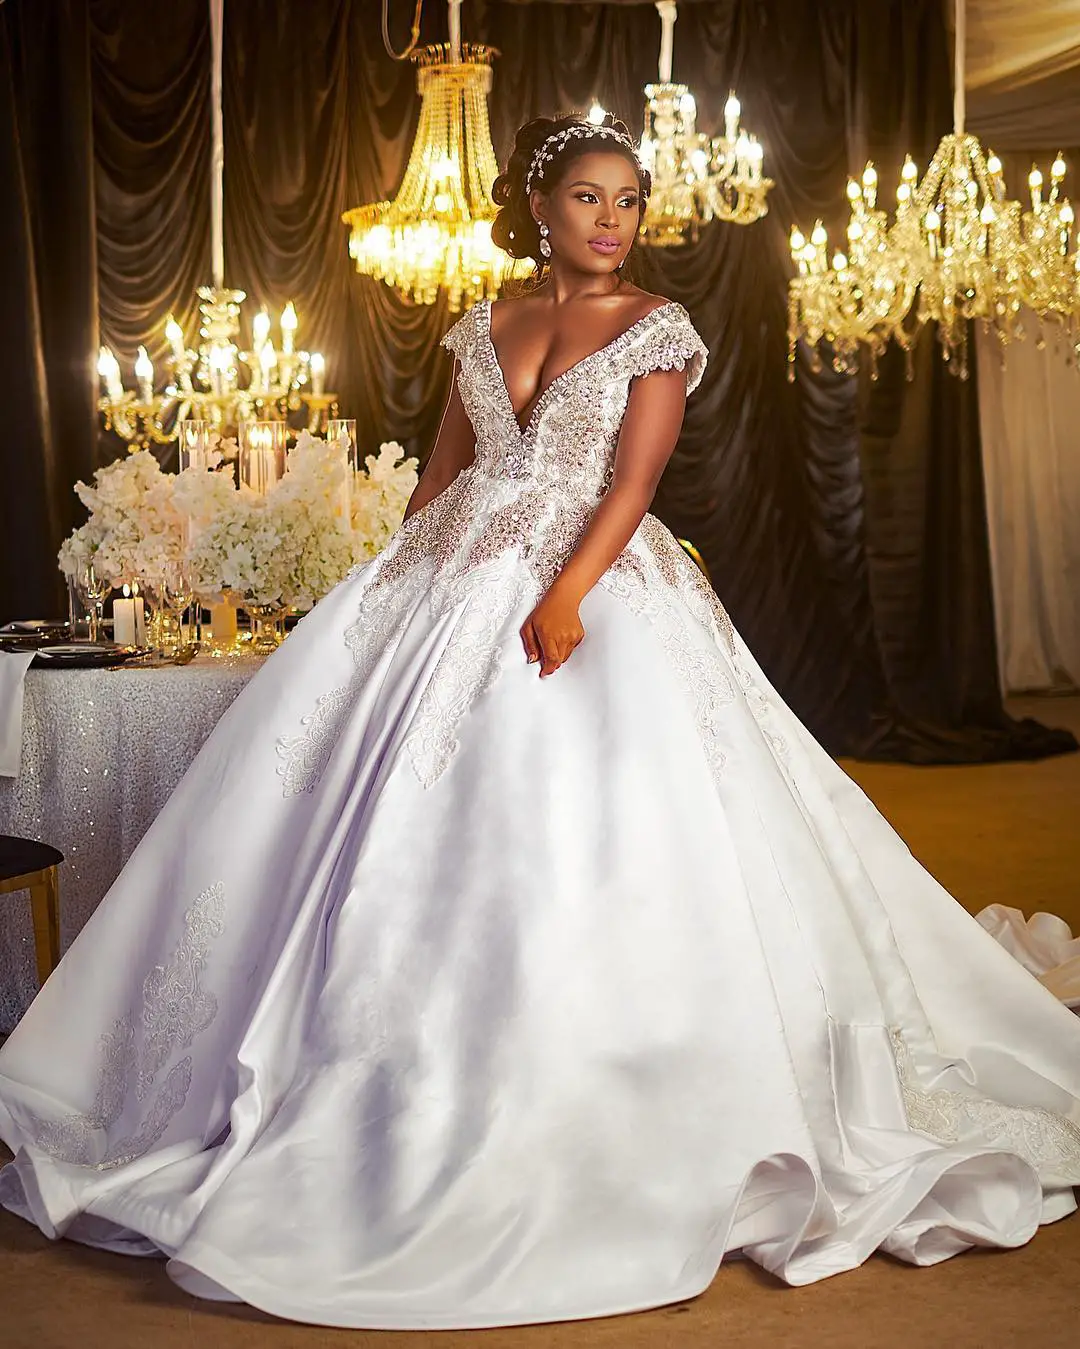 Check Out These Fashionable Wedding Gown Styles By Sima Brew